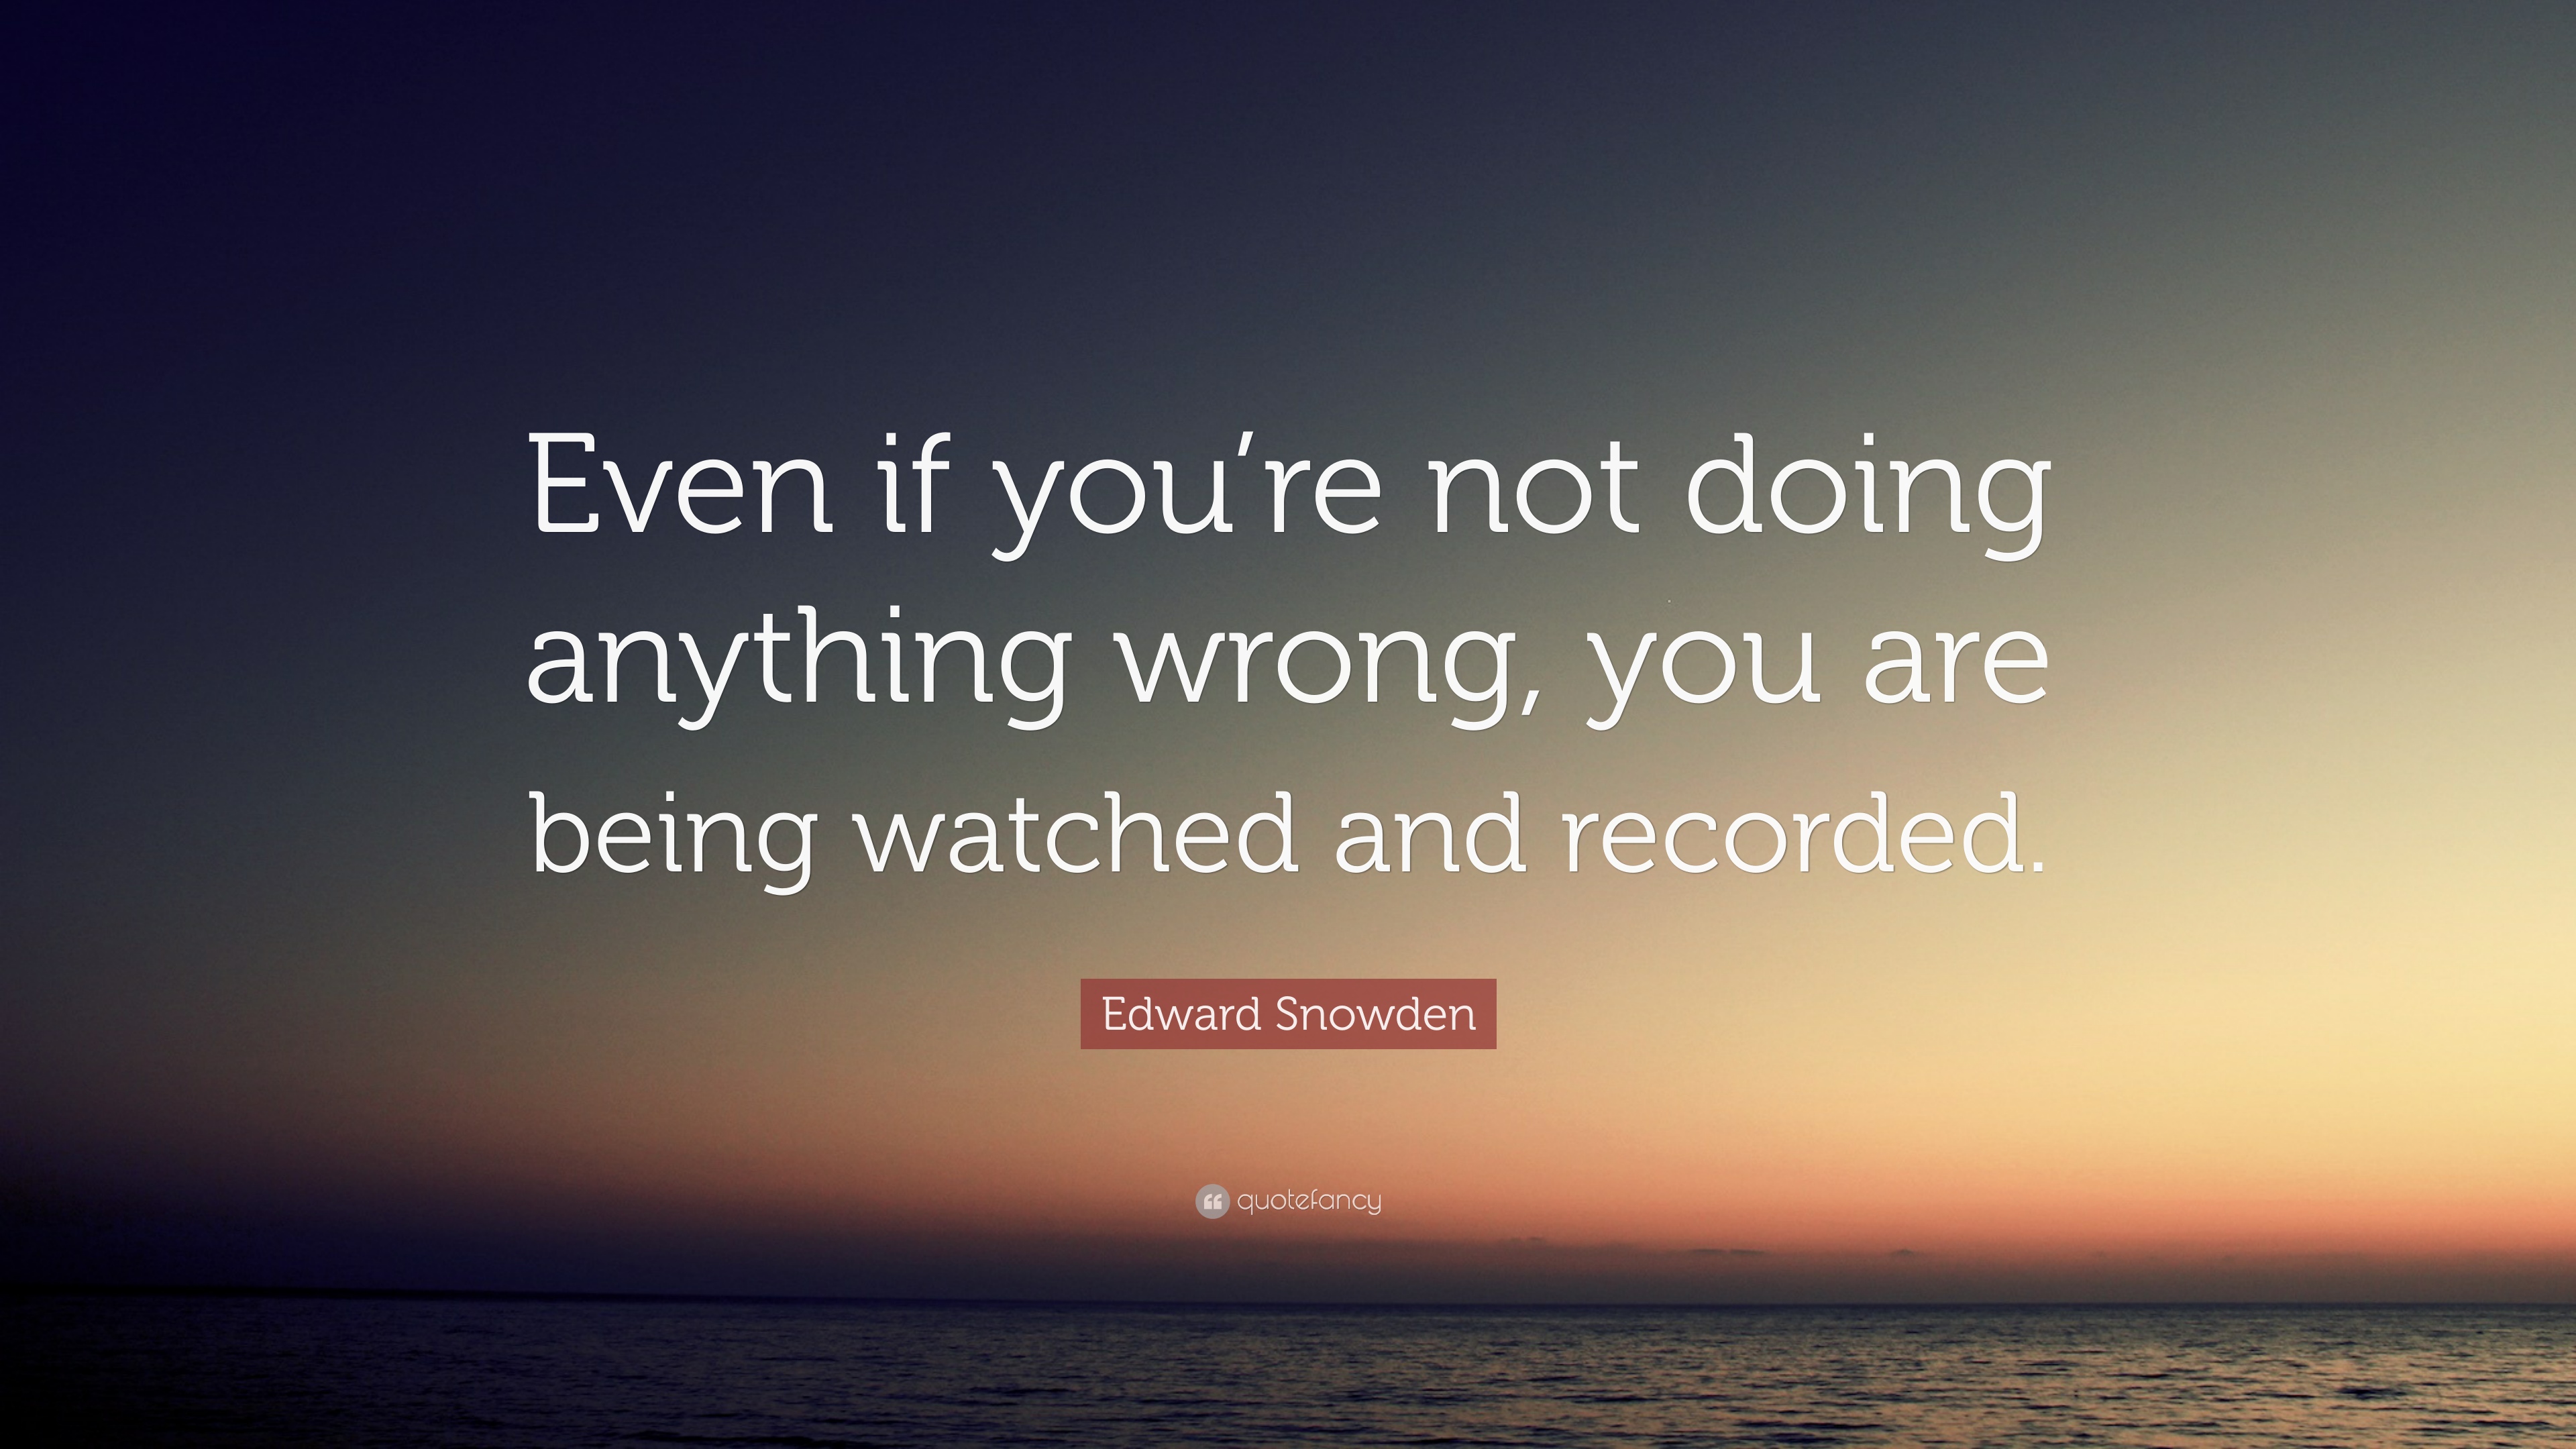 Edward Snowden Quote: “Even if you're not doing anything wrong, you